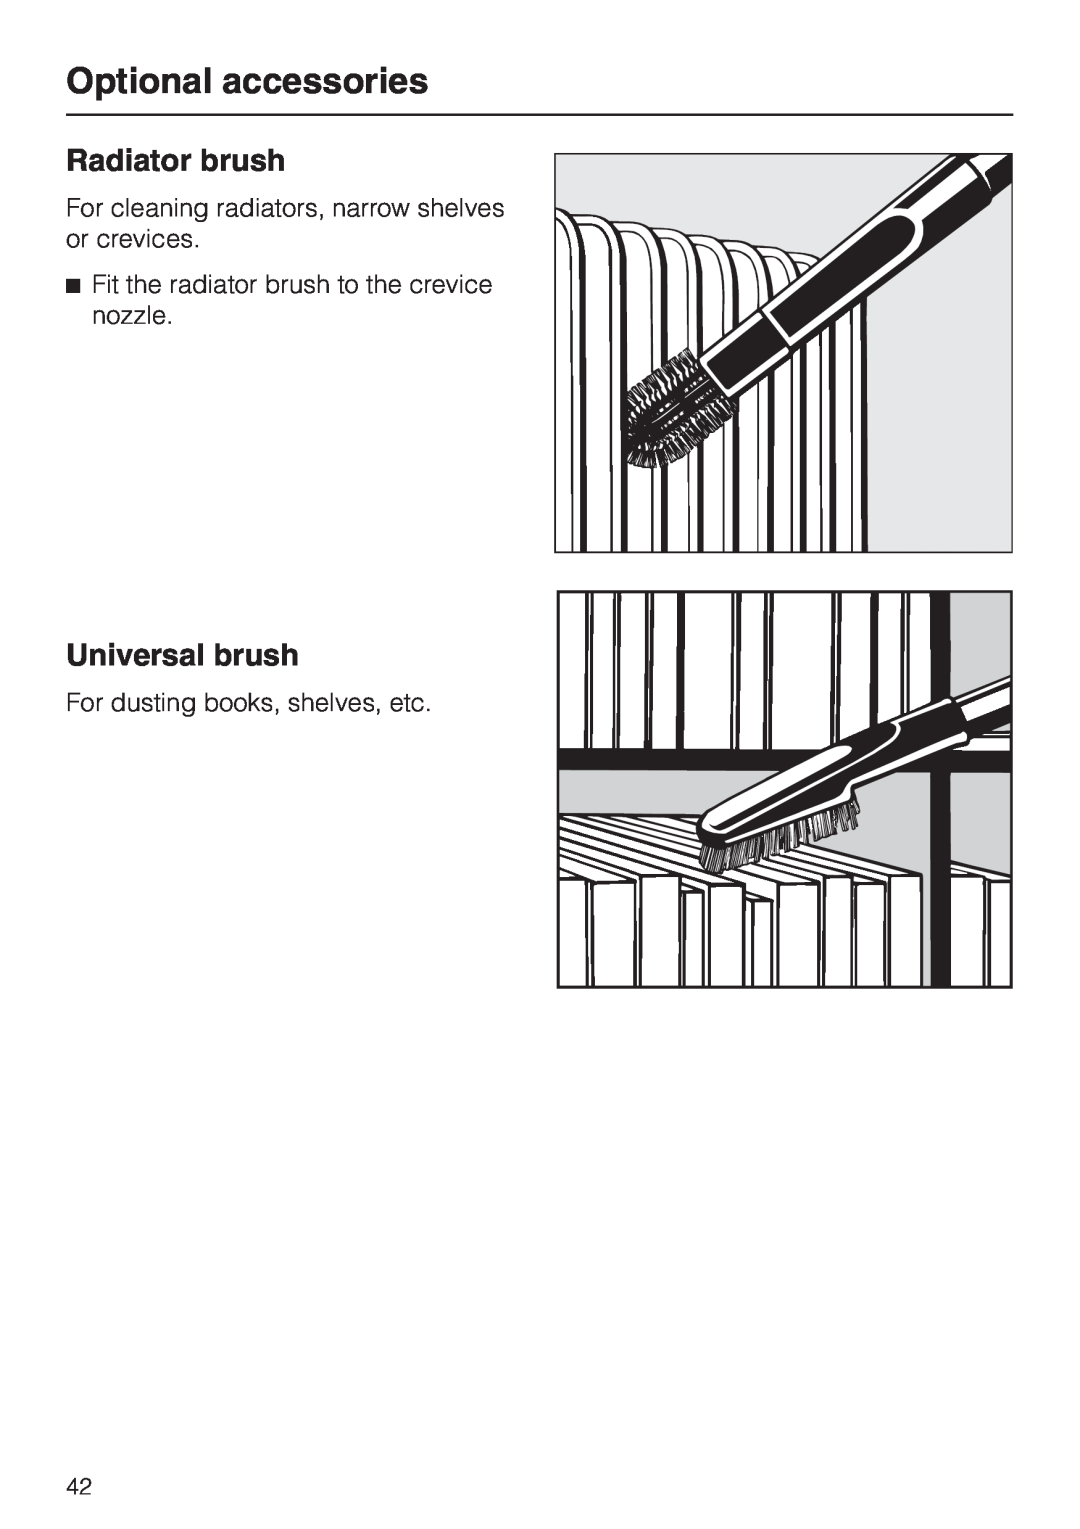 Miele S 658 manual Radiator brush, Universal brush, Optional accessories, Fit the radiator brush to the crevice nozzle 